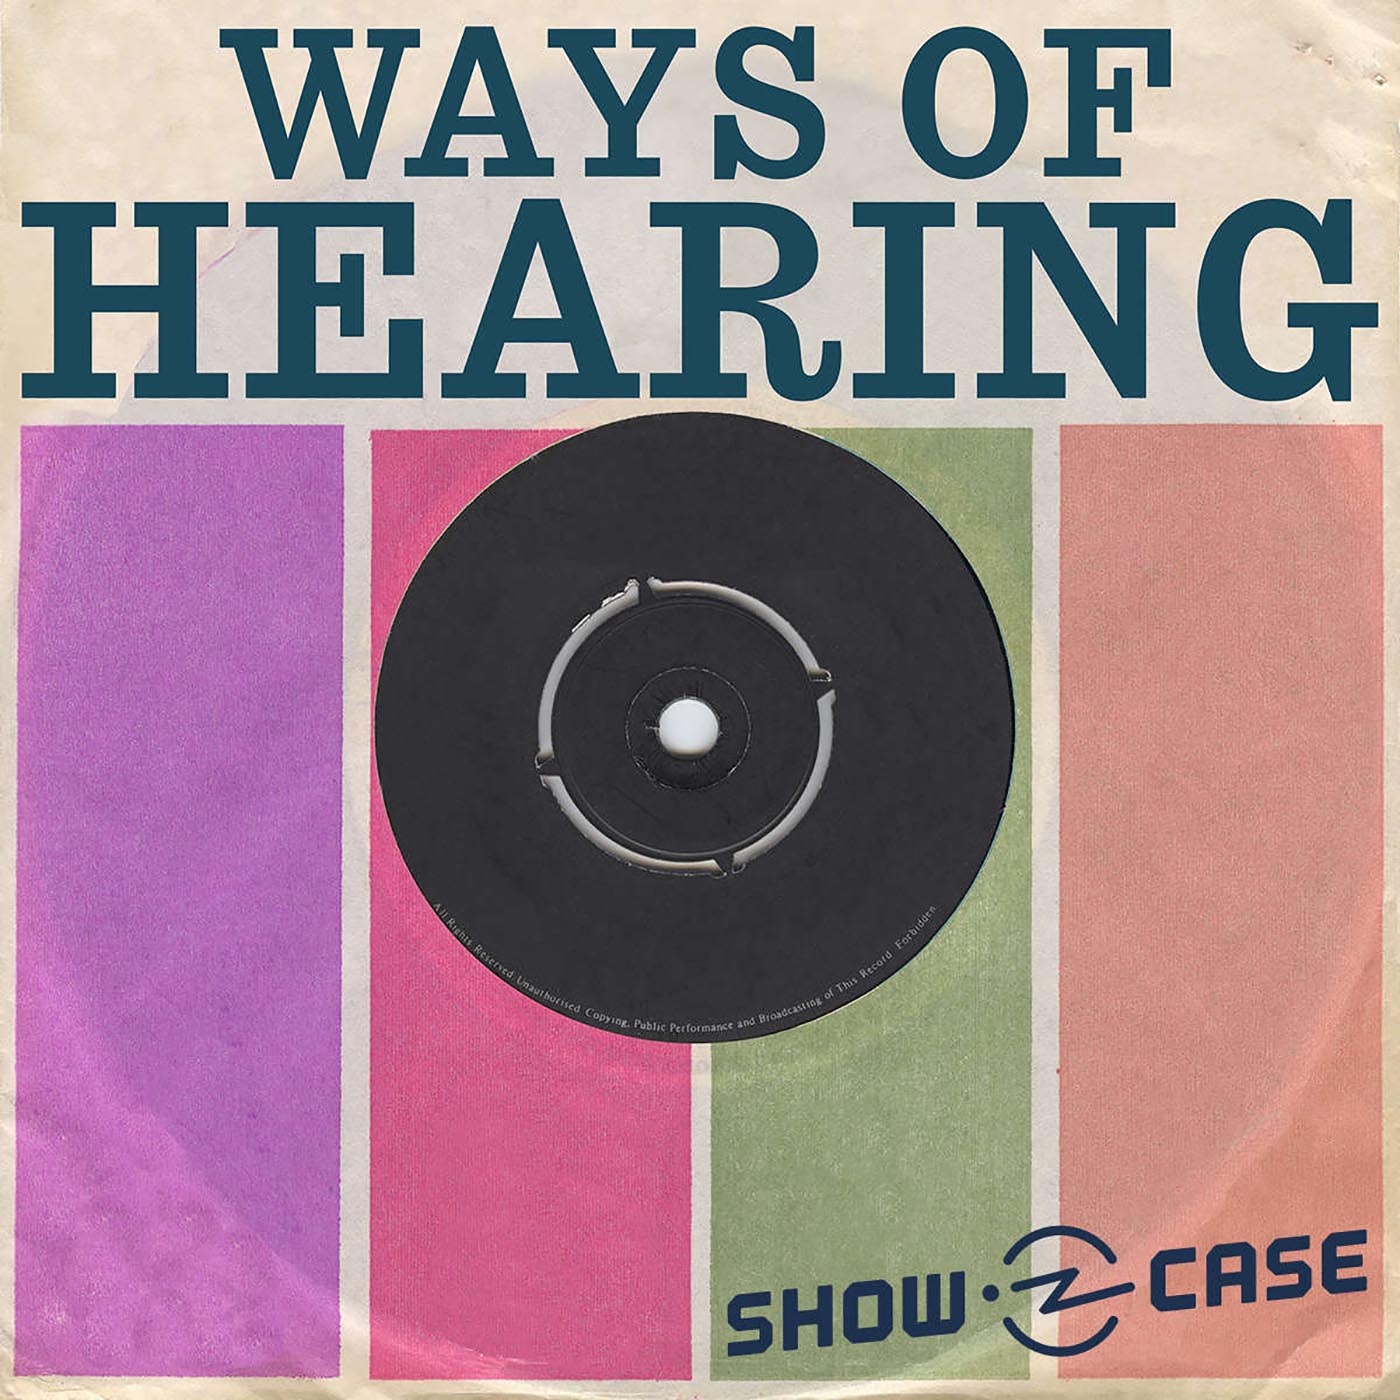 Ways of Hearing #1 – TIME